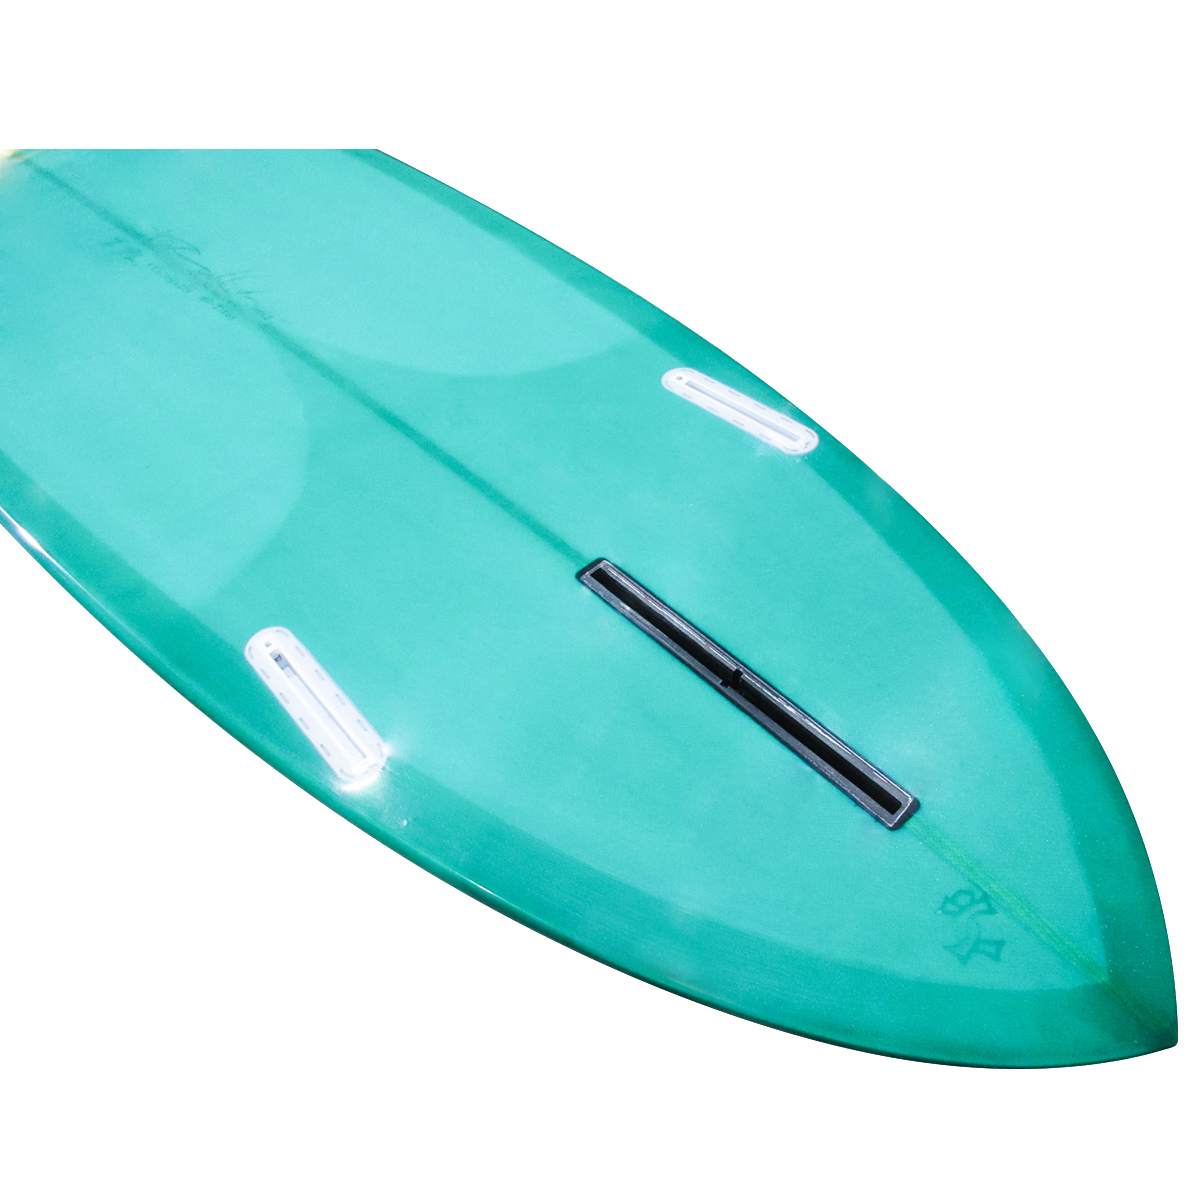 KEVIN CONNELLY SURFBOARDS / P1